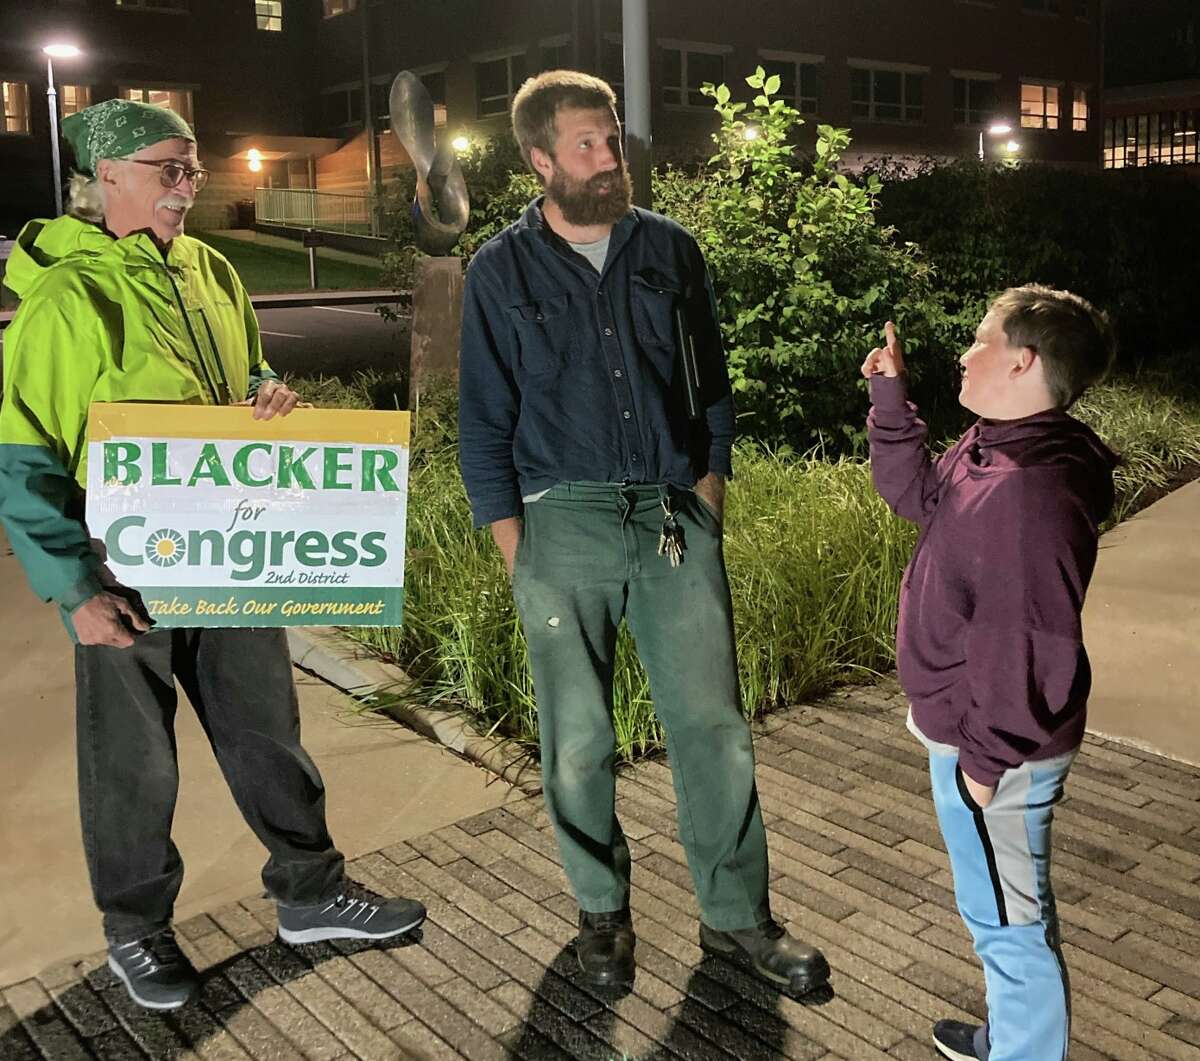 Kevin Blacker, center, is running against Joe Courtney for Connecticut' 2nd Congressional District. 